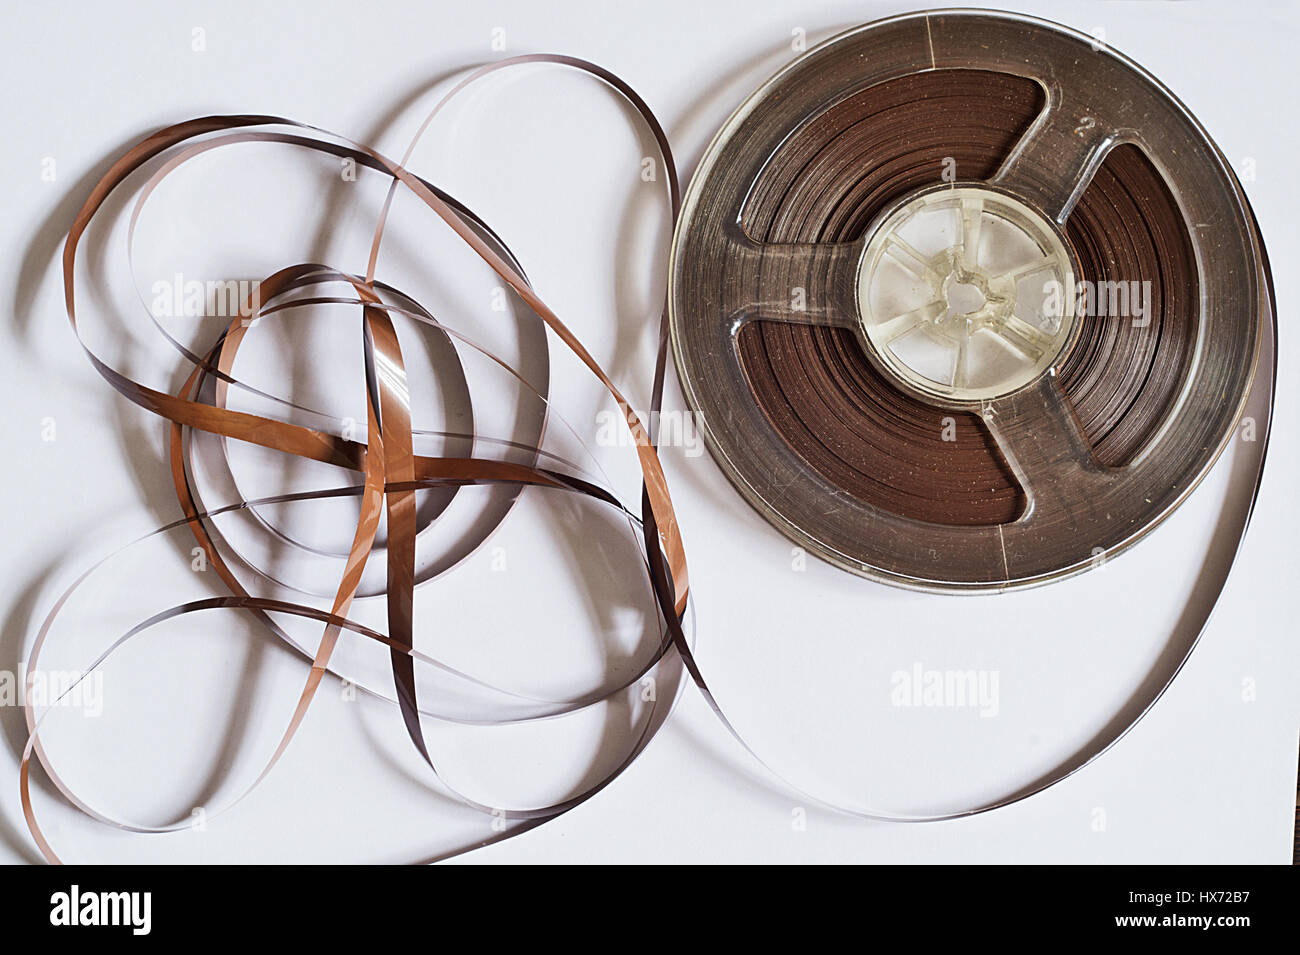 Old reel with magnetic tape for the record player Stock Photo - Alamy